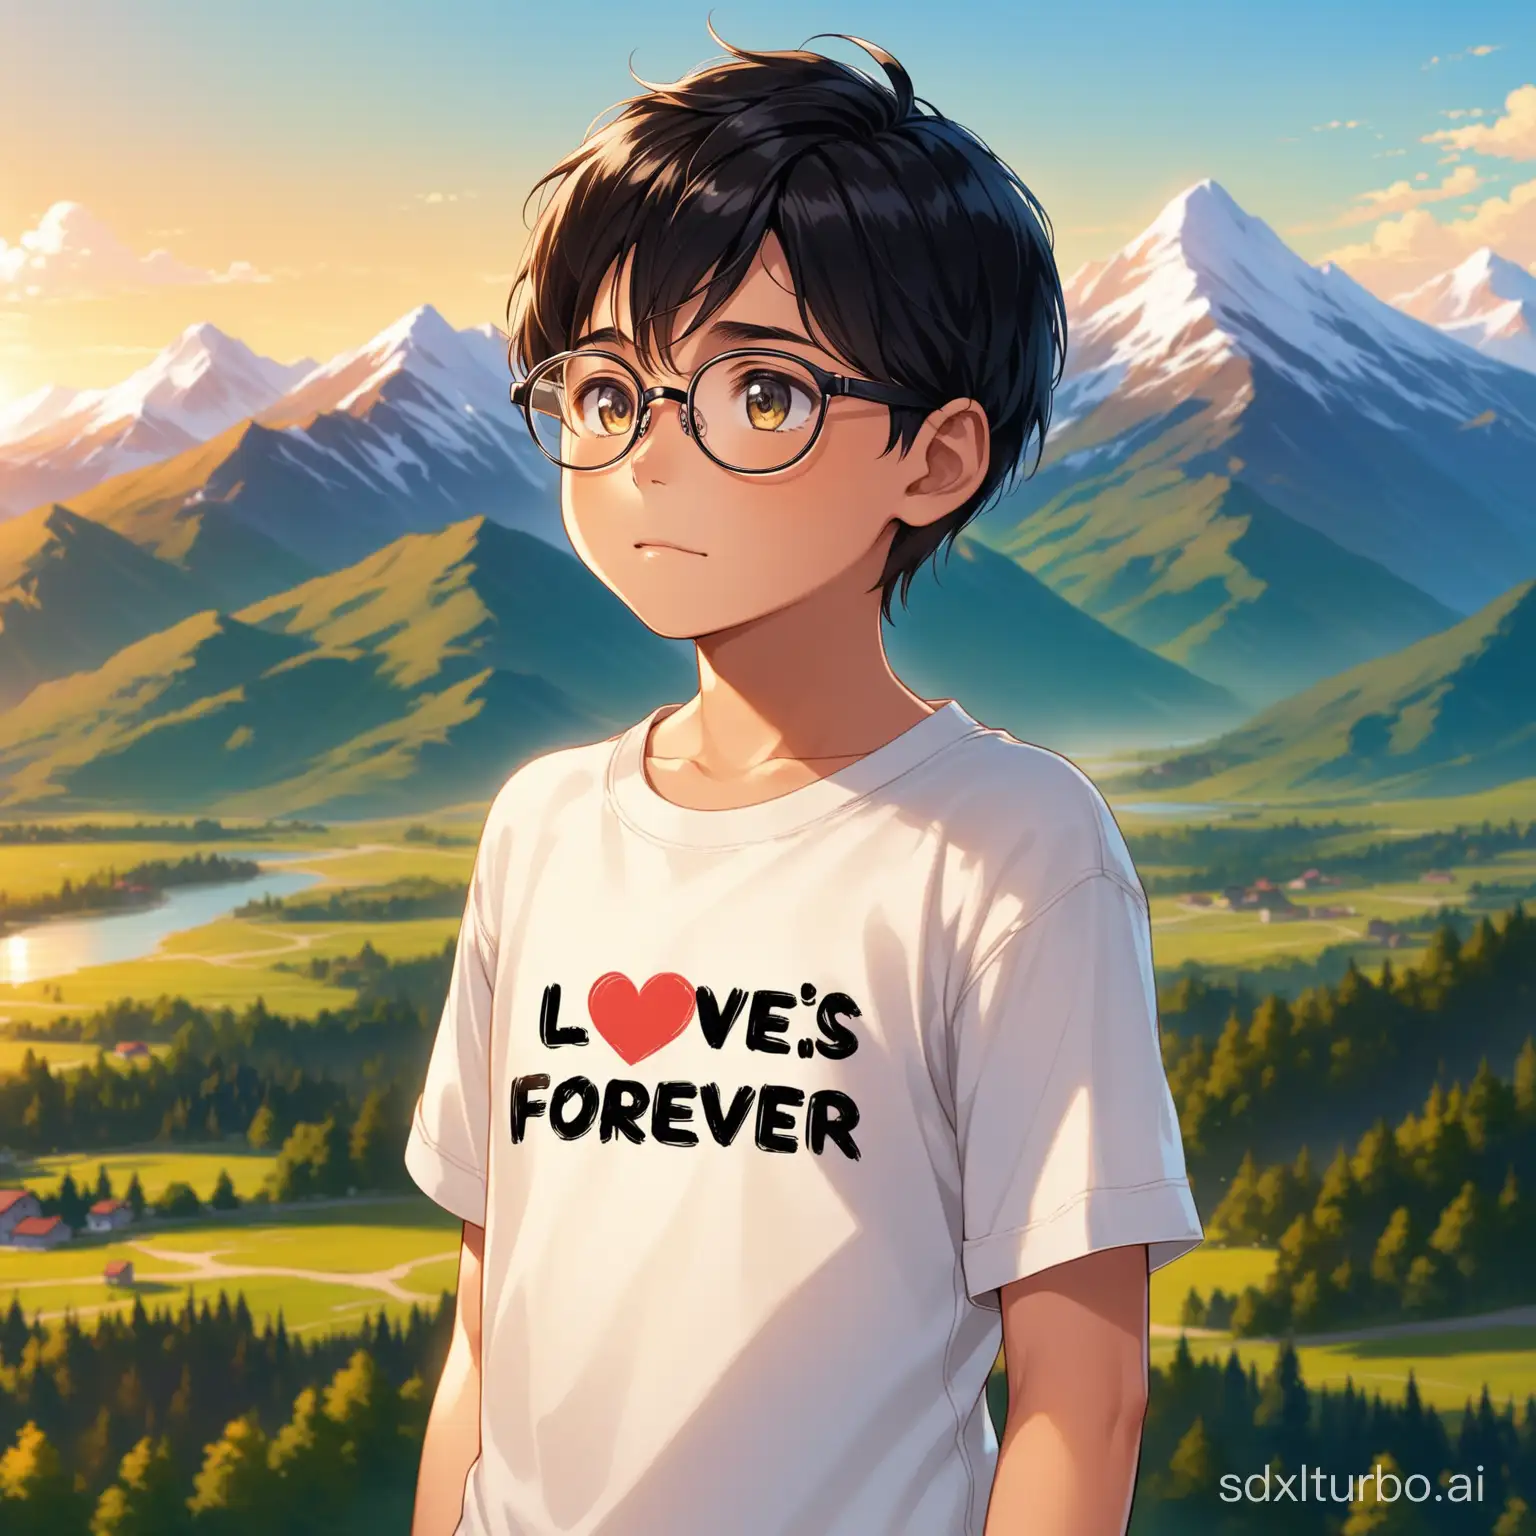 Adventurous-Boy-with-LOVE-IS-FOREVER-Shirt-Gazing-at-Distant-Mountains